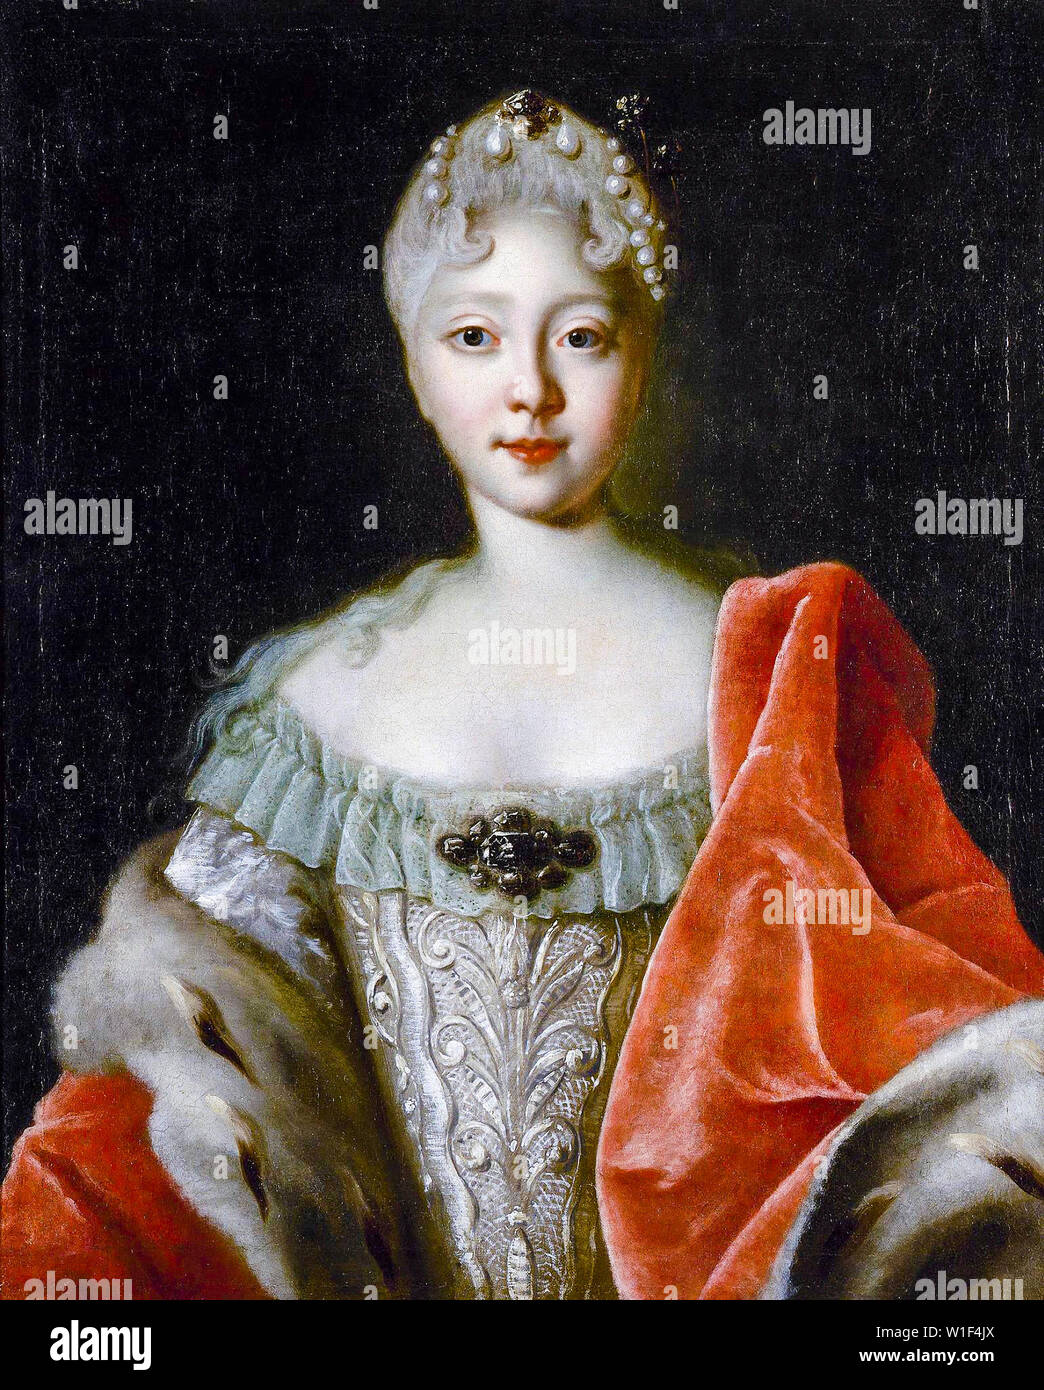 Louis Caravaque, Elizabeth of Russia, 1709-1762, as a young woman, portrait painting, 1720-1729 Stock Photo